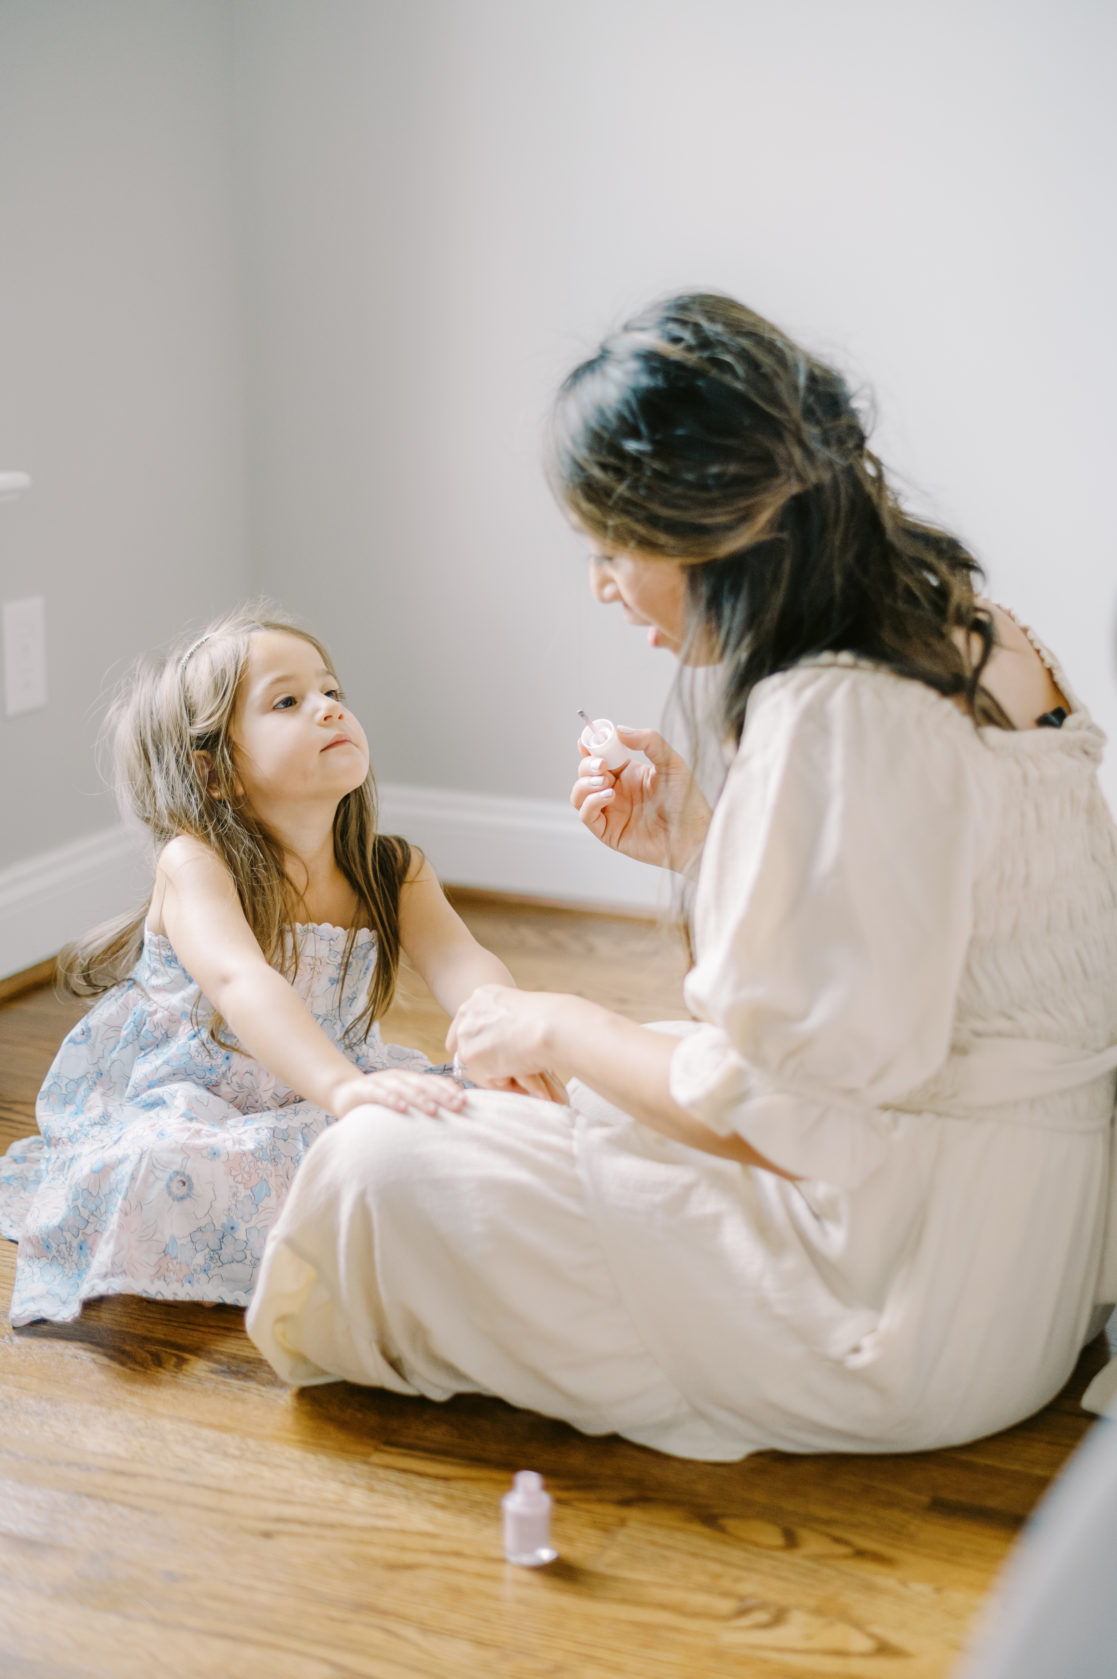 Photo of mom and daughter painting nails by Richmond family photographer Jacqueline Aimee Portraits